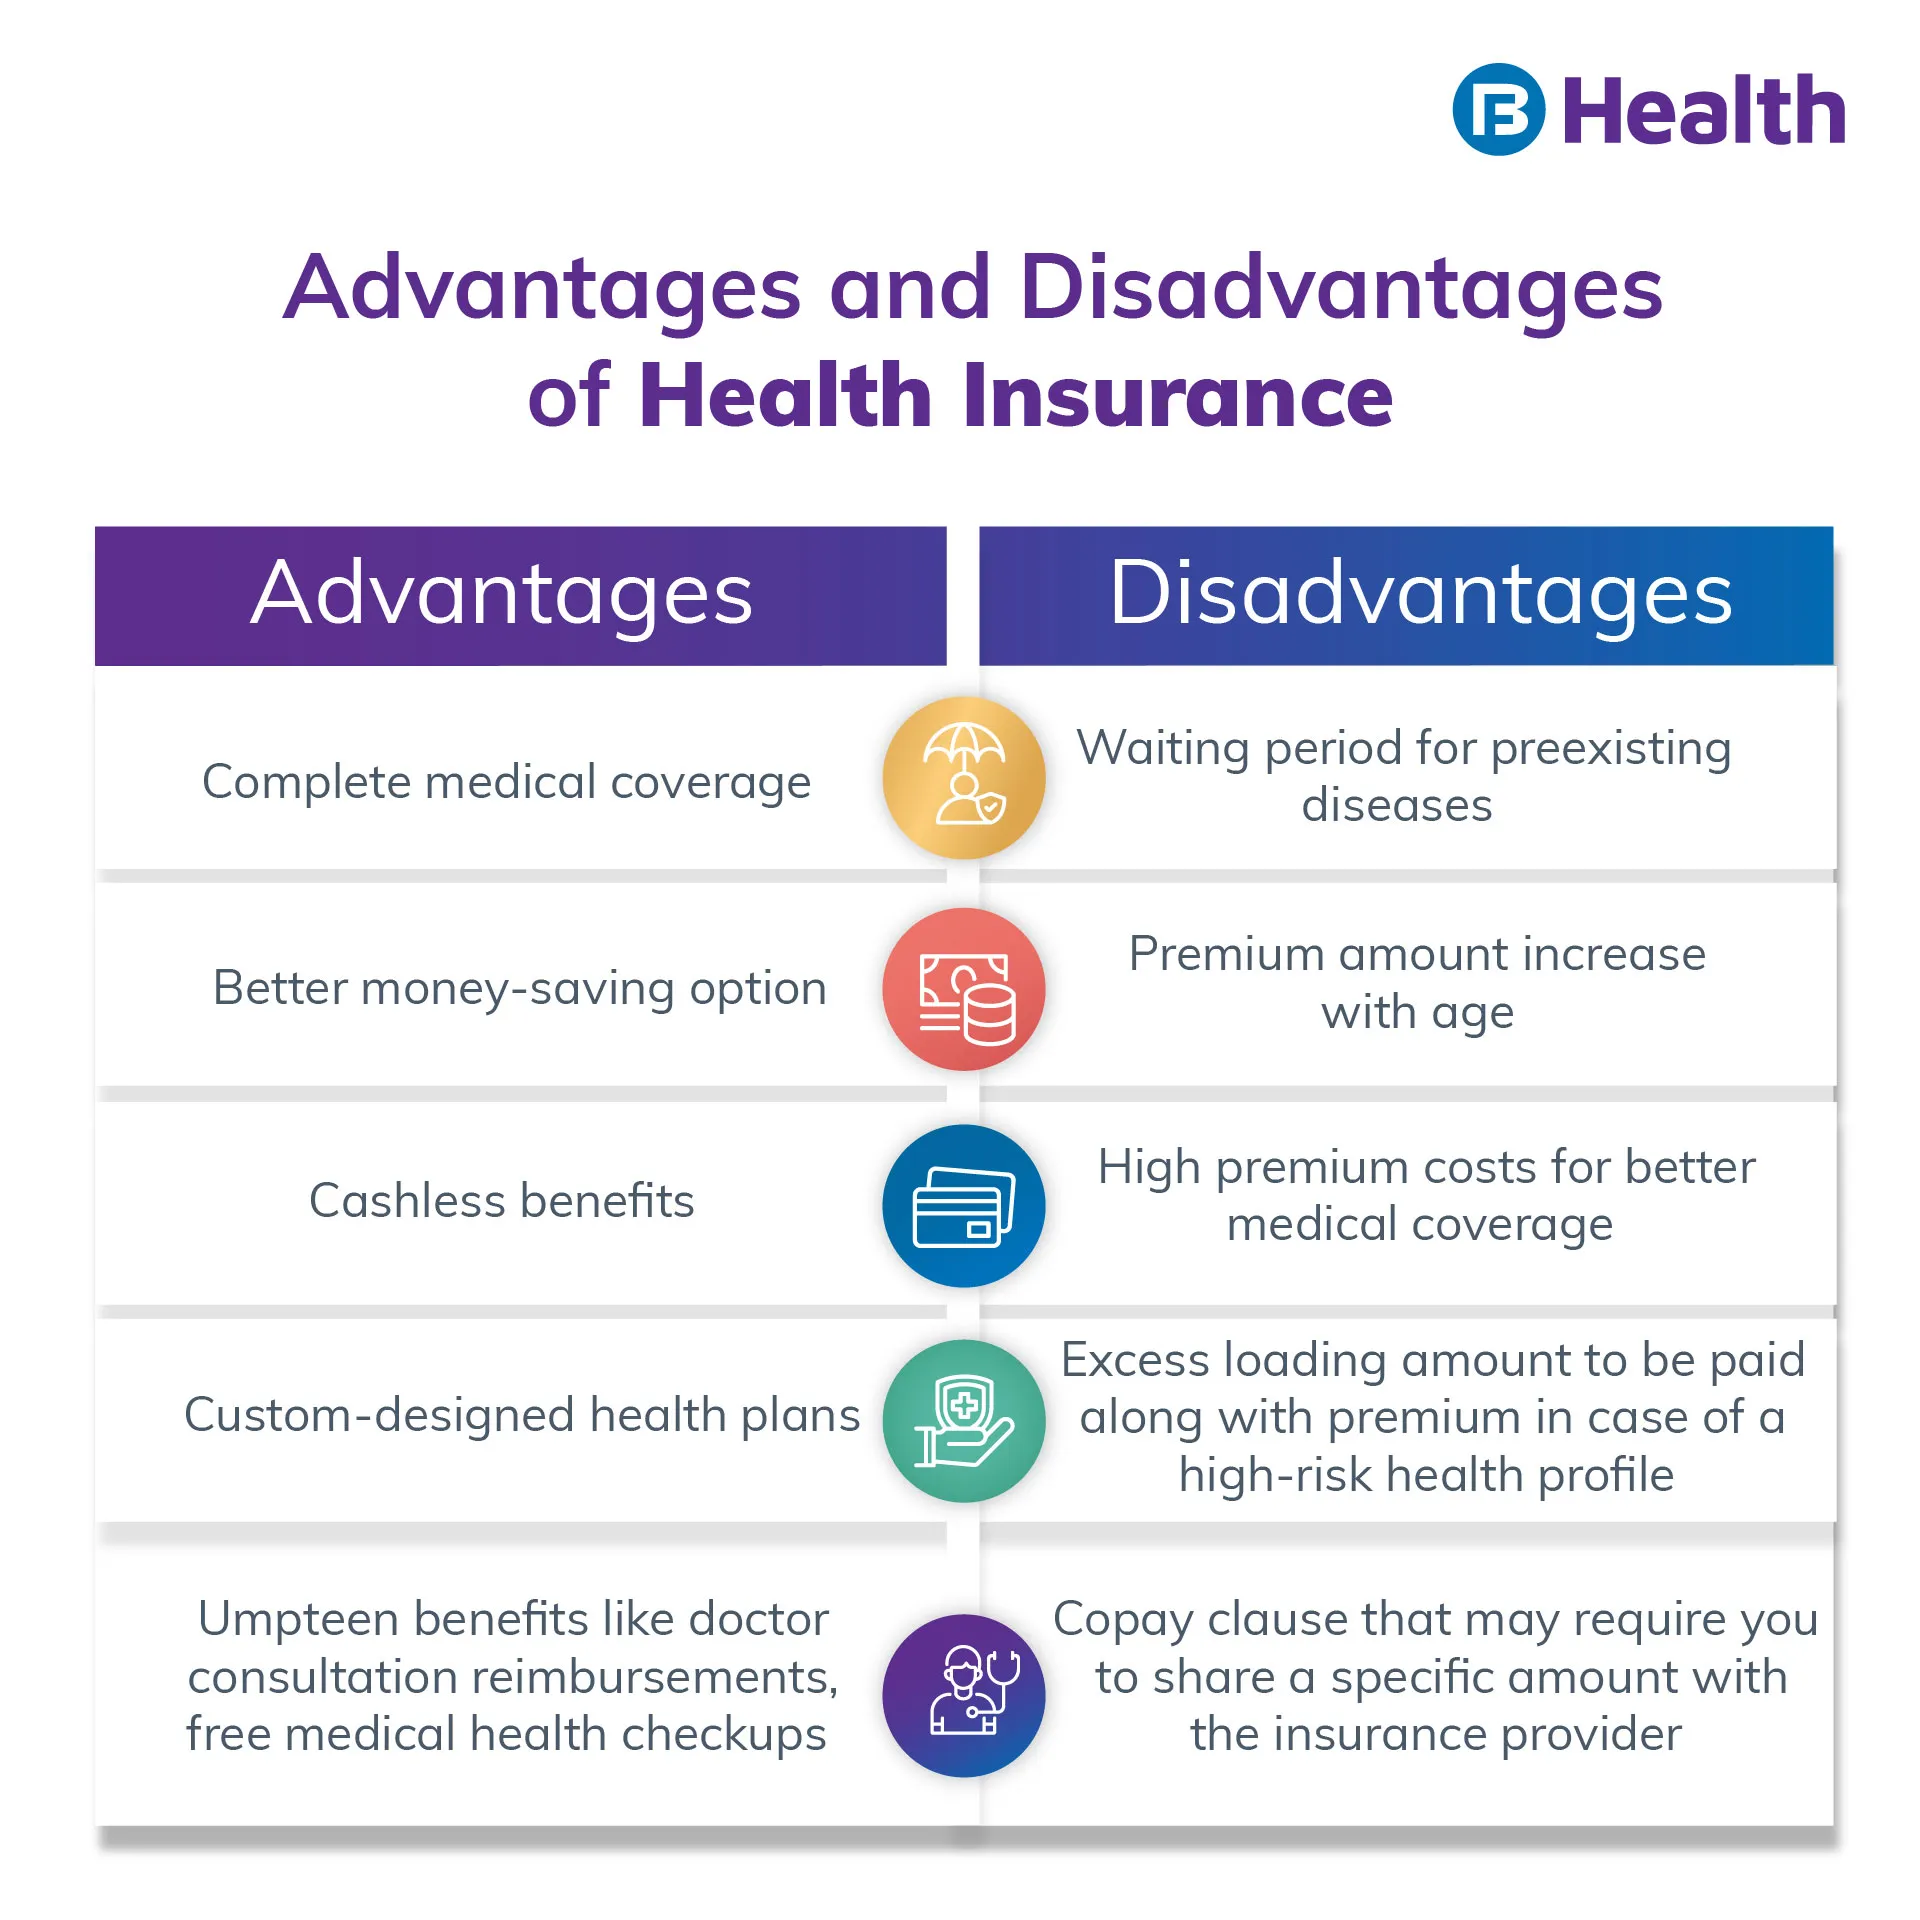 Advantages and Disadvantages of Health Insurance